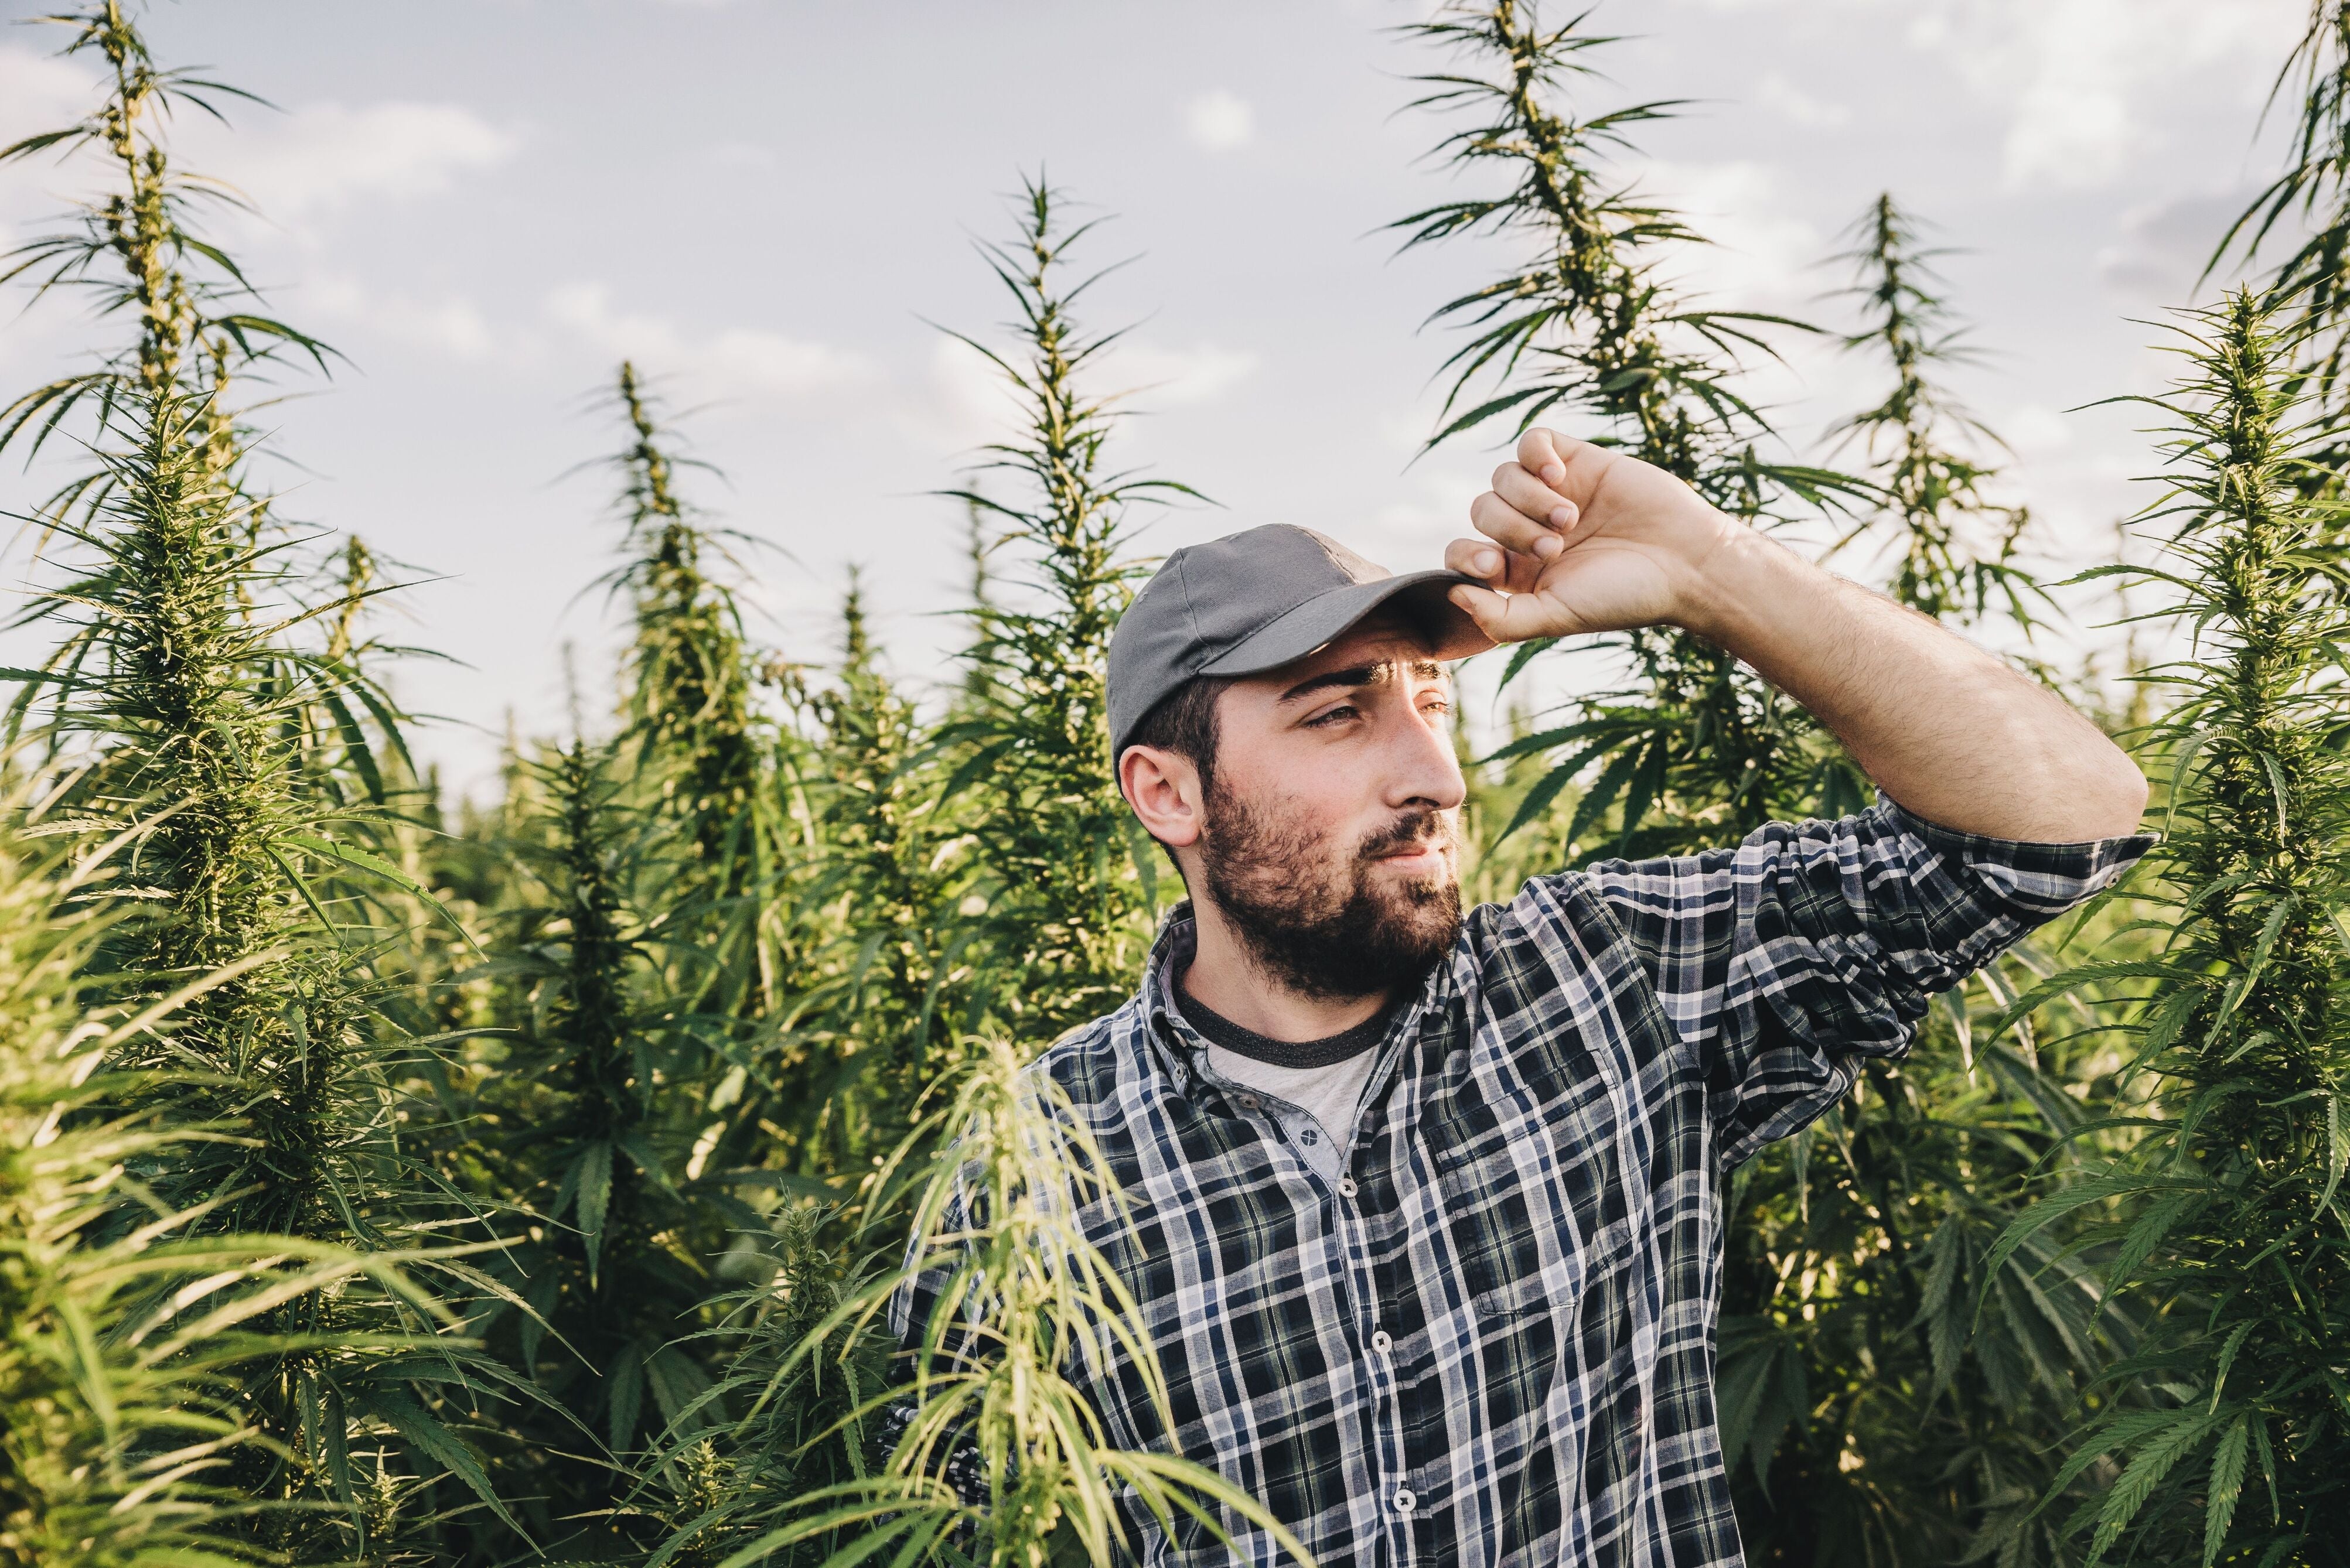 New hemp operations face more barriers than consumers may realize